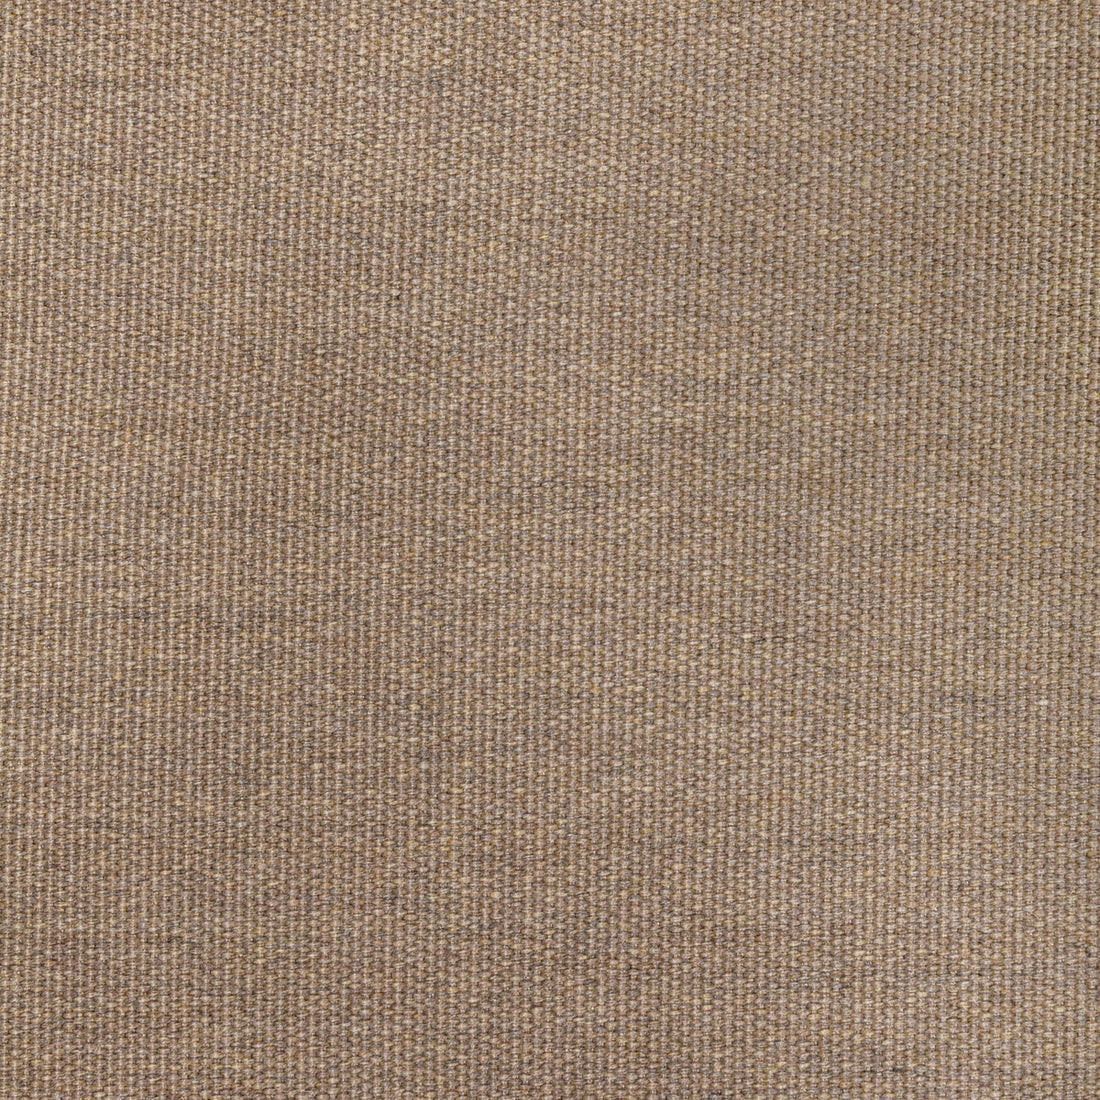 Kravet Basics fabric in 36827-1616 color - pattern 36827.1616.0 - by Kravet Basics in the Indoor / Outdoor collection